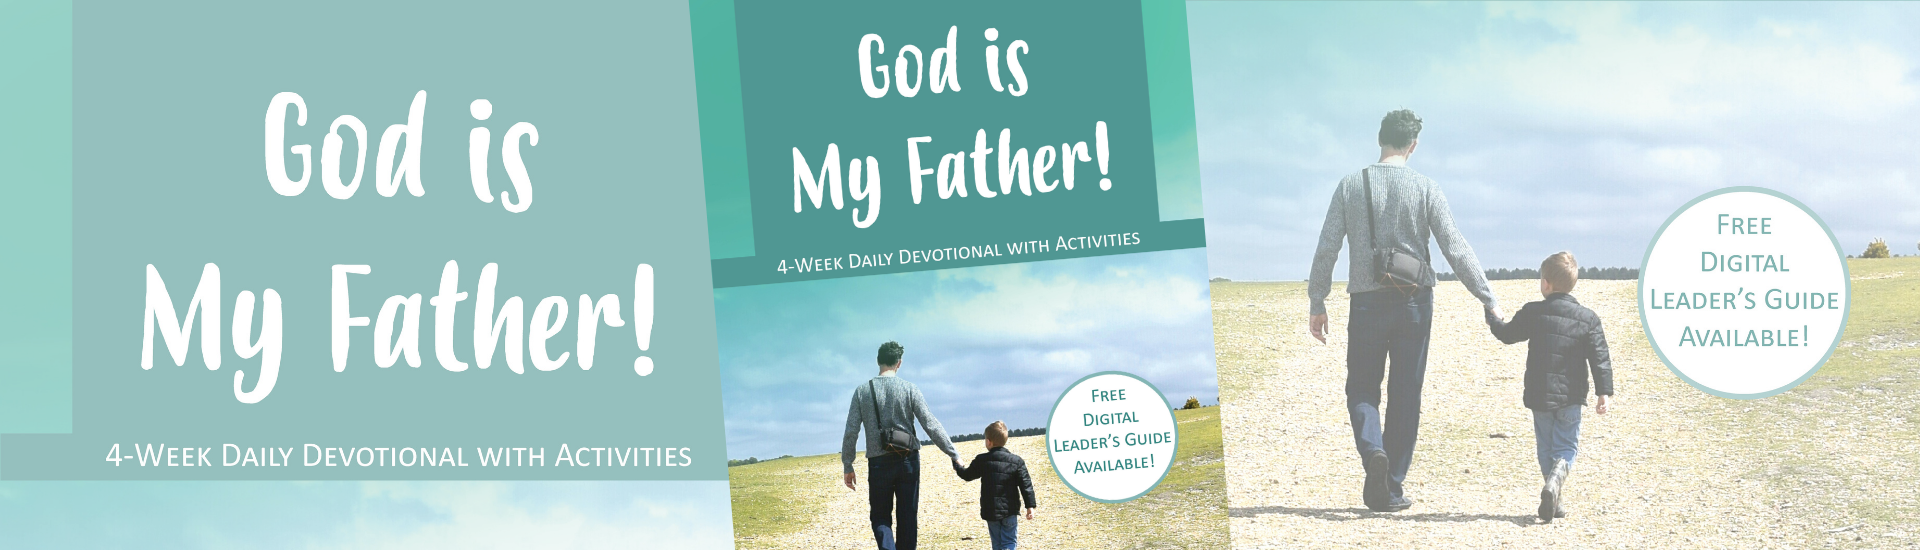 God is My Father Cover Image